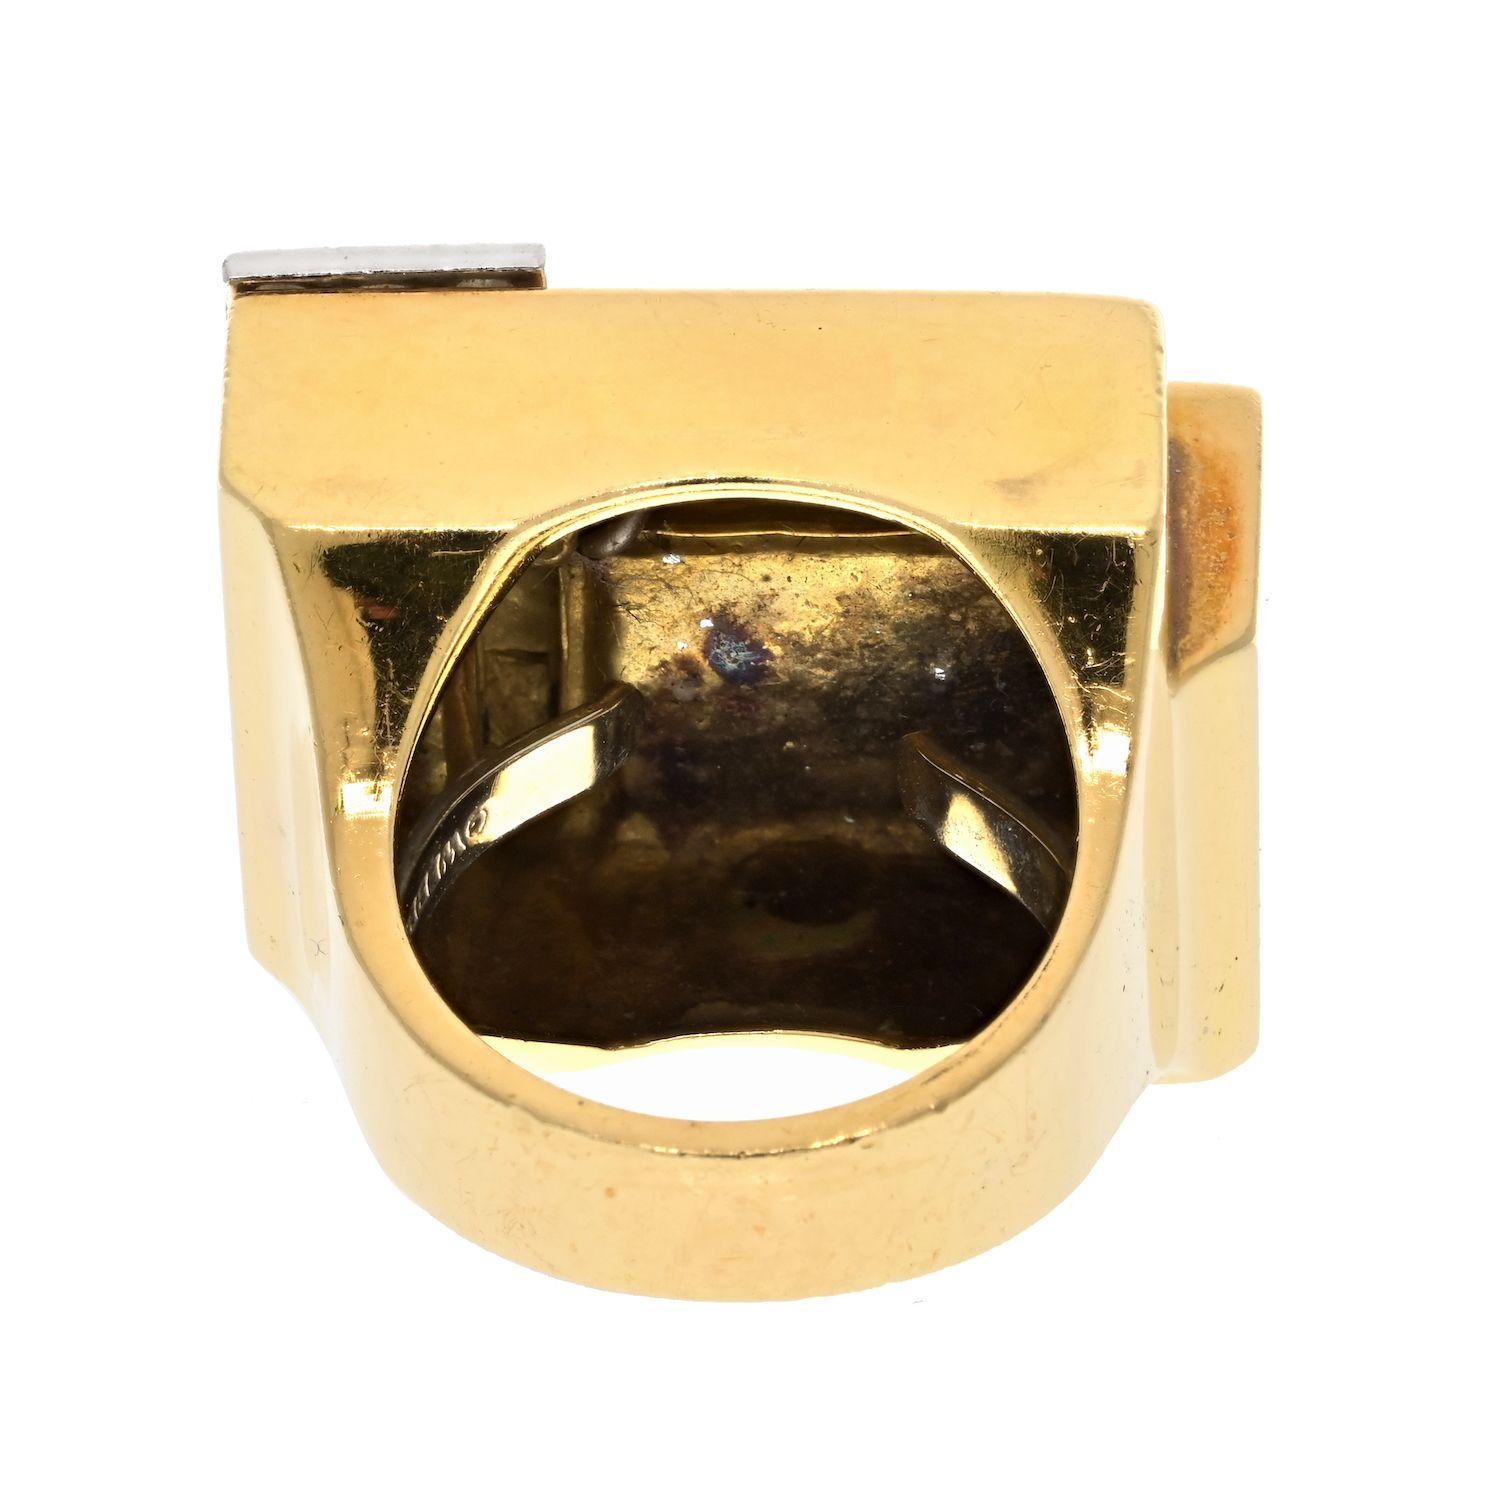 Owning this David Webb ring is truly exciting! The platinum, 18K yellow gold, and white enamel create a stunning and unique look that can't be matched. This is a geometric free form cocktail ring by David Webb that makes a statement. When diamonds